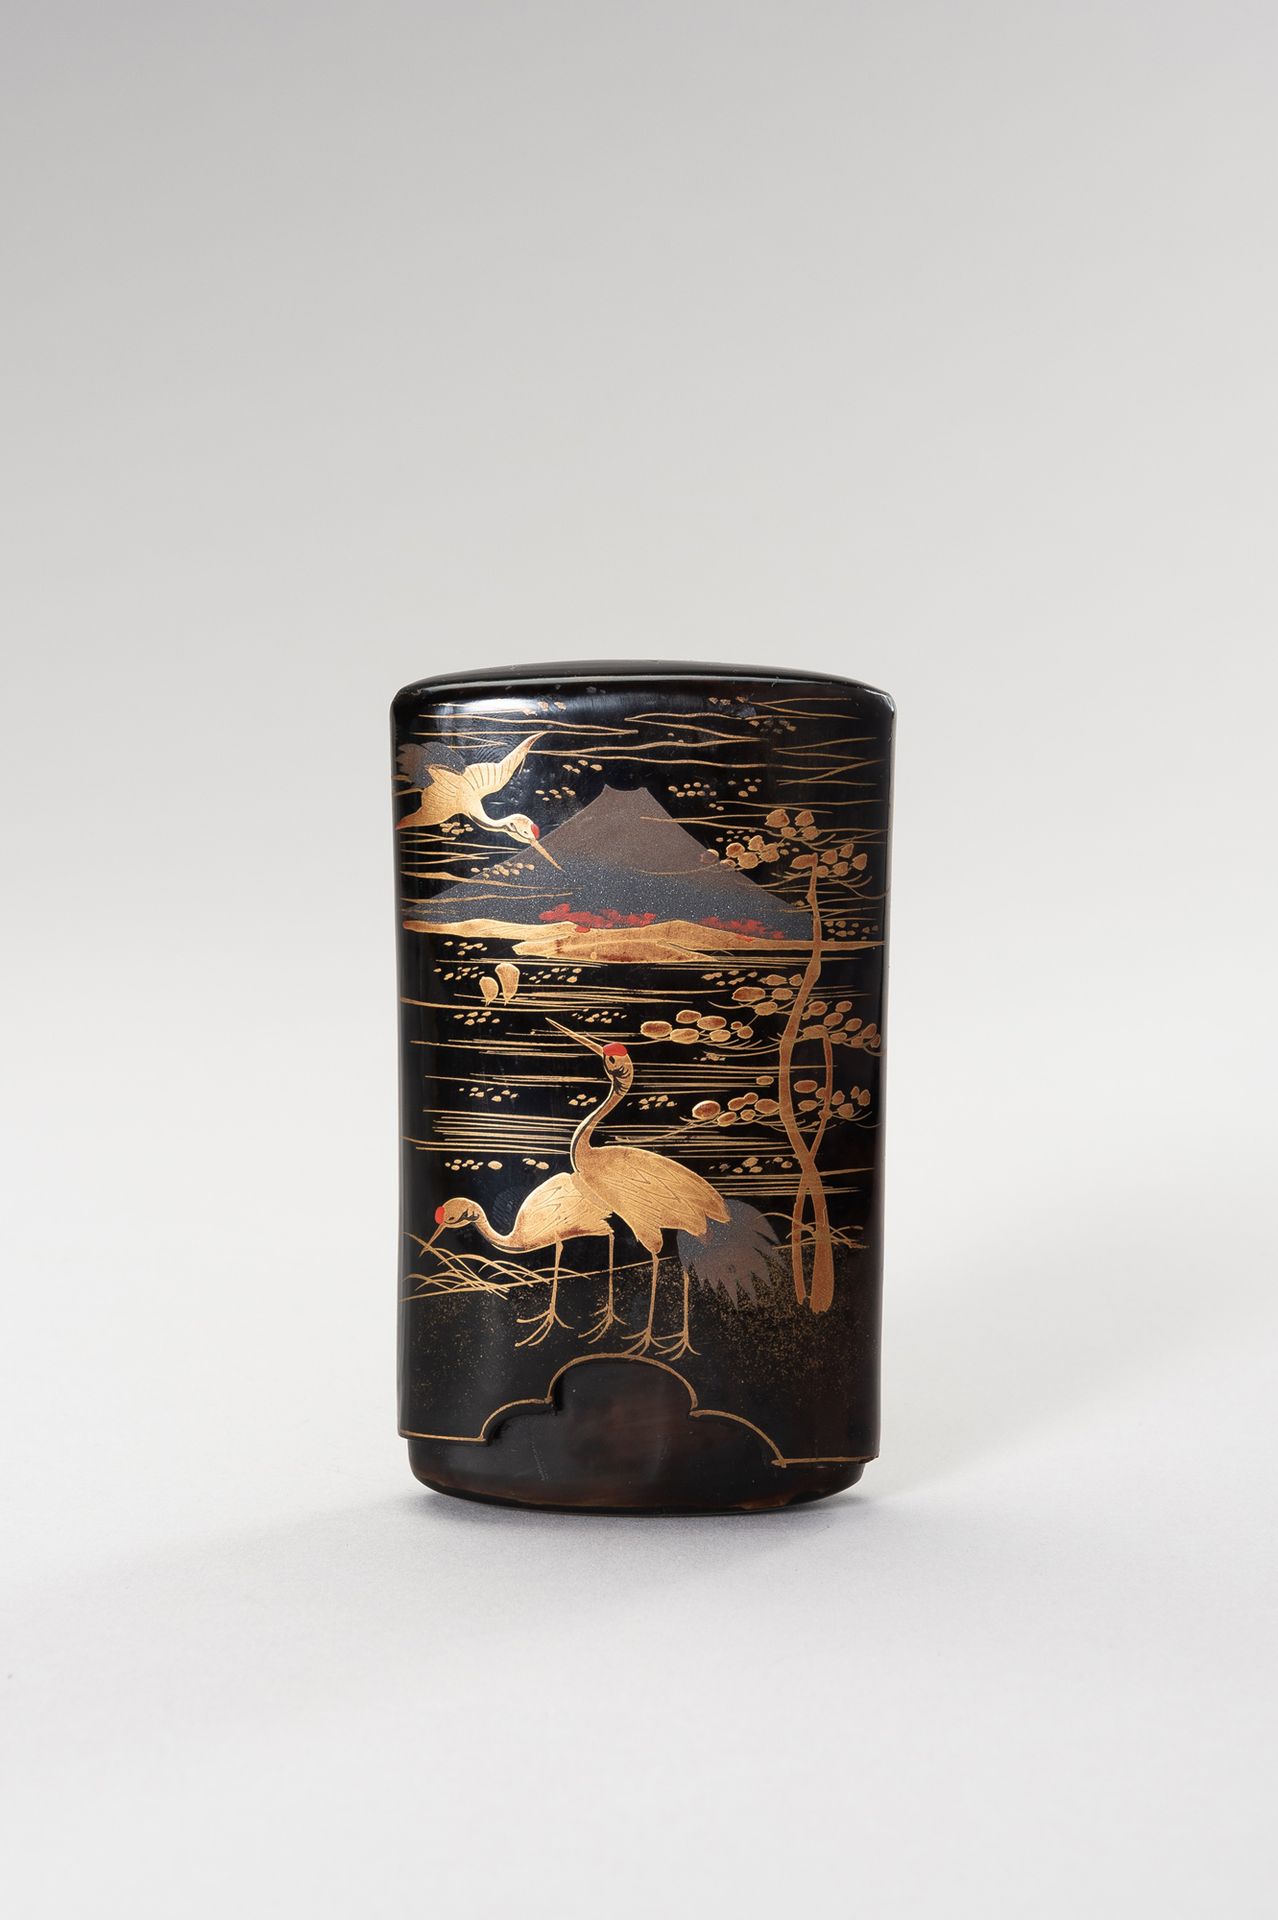 A FINE LACQUERED TORTOISESHELL CASE WITH MOUNT FUJI AND CRANES ESTUCHEDE CONCHA &hellip;